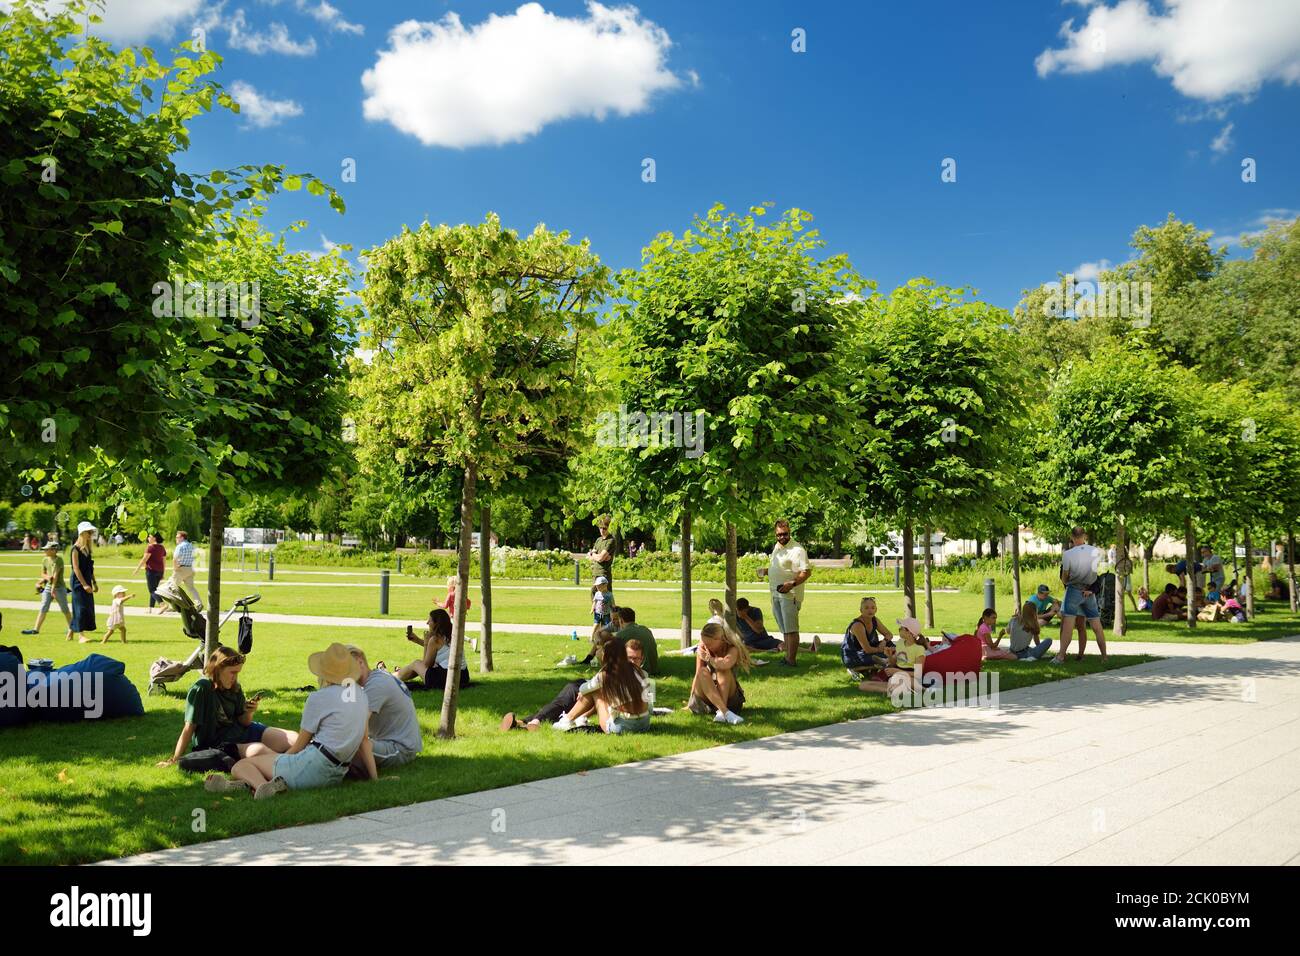 VILNIUS, LITHUANIA - JULY 14, 2020: People having fun on newly renovated Lukiskes square in Vilnius. Sunny summer day in UNESCO-inscribed Old Town of Stock Photo